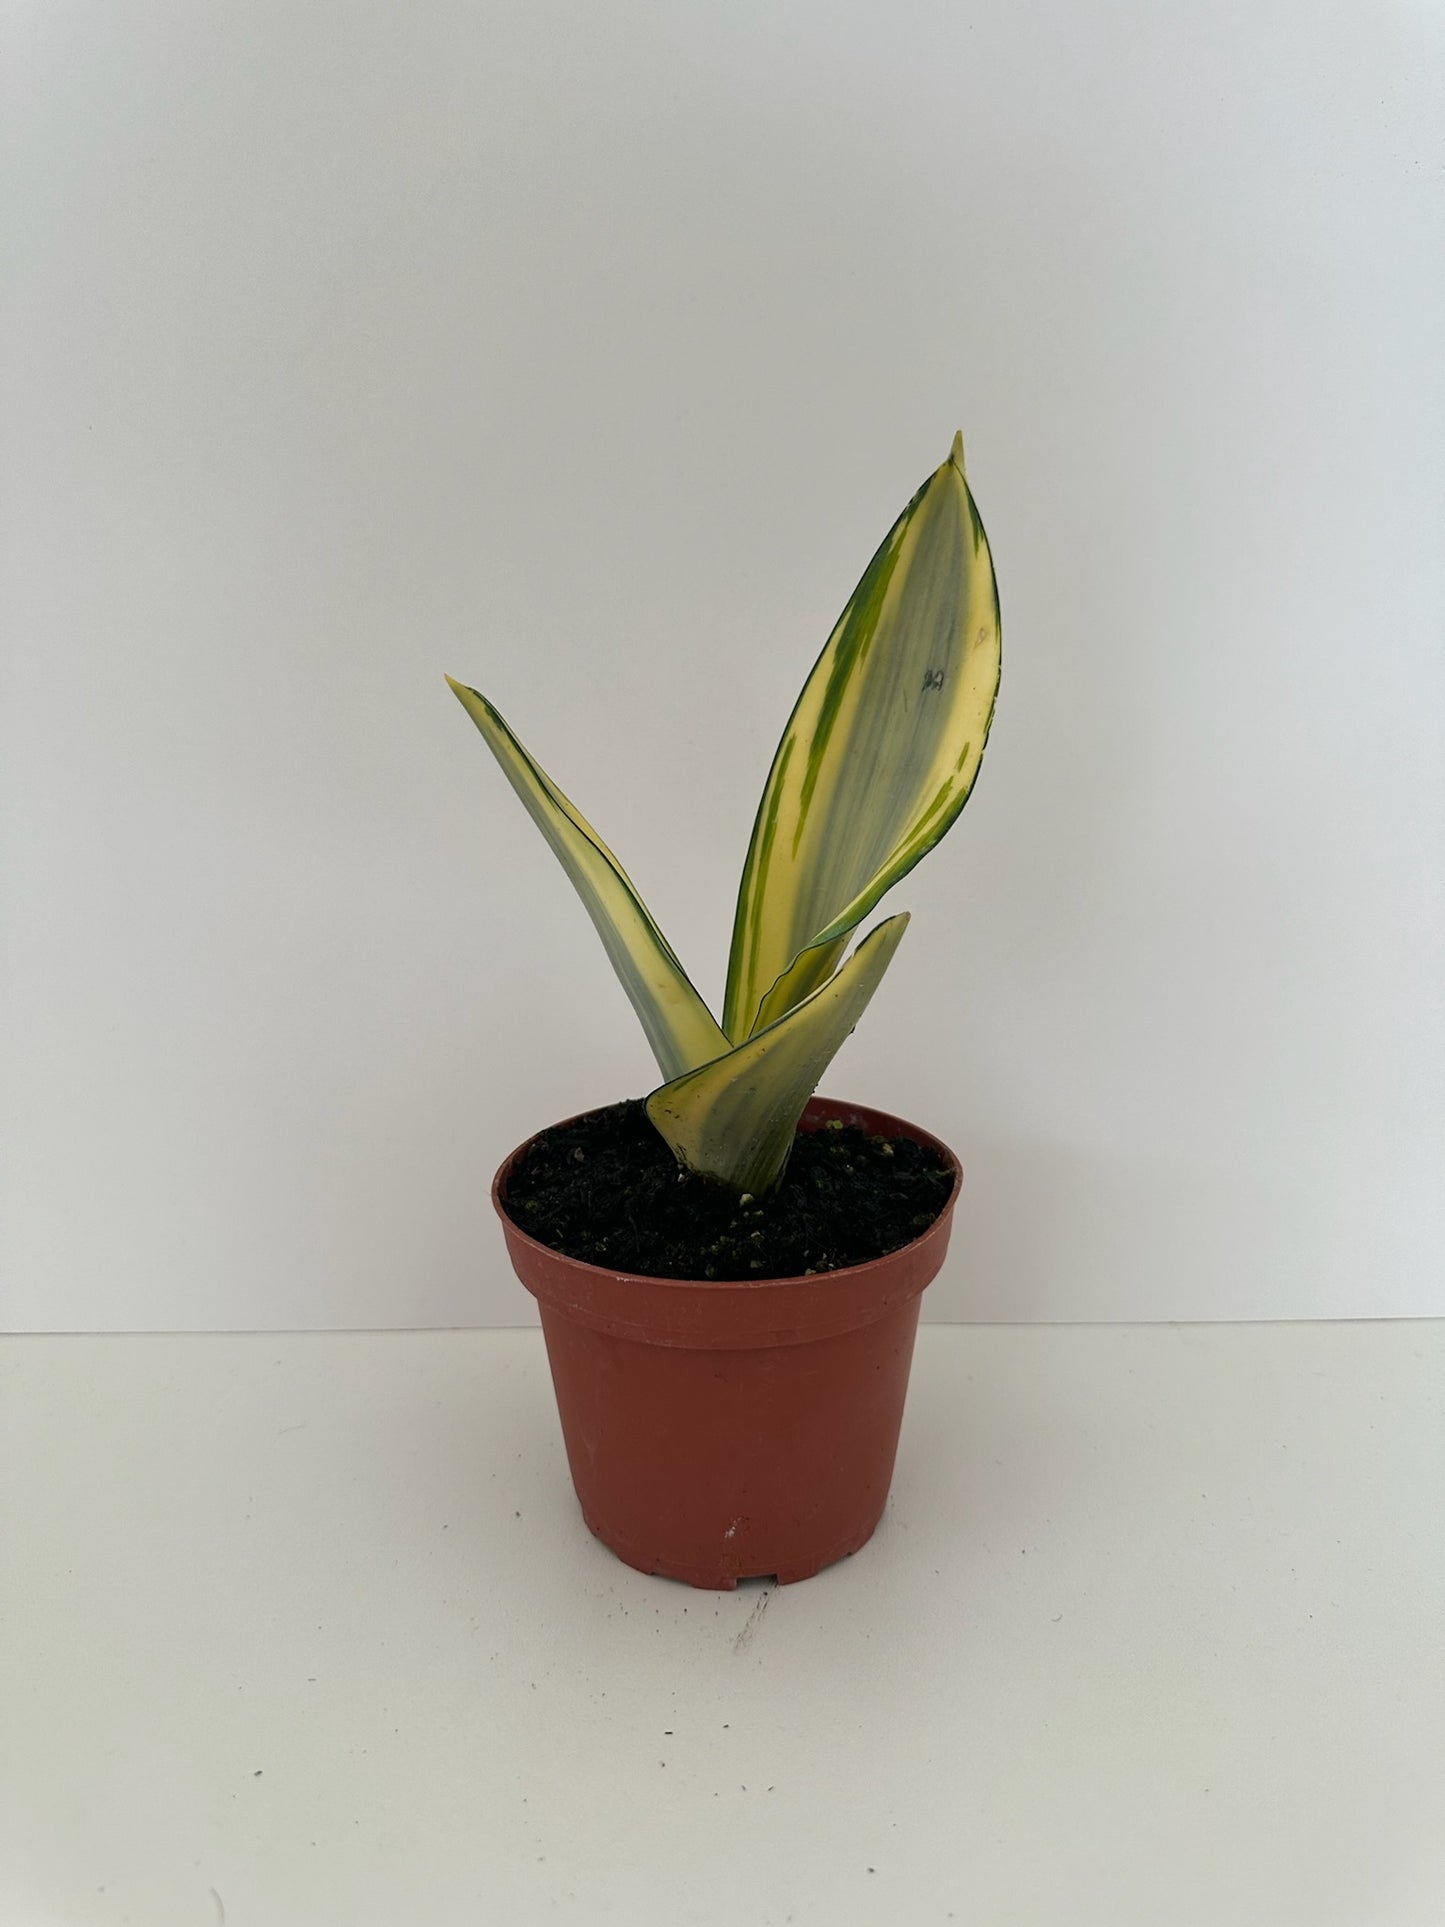 Sansevieria Trifasciata 'Gold Ghost' Snake Plant- Low Maintenance, Low Light & Vibrant Colored Leaves- Tropical Houseplant (4" or 6" Nursery Pot)